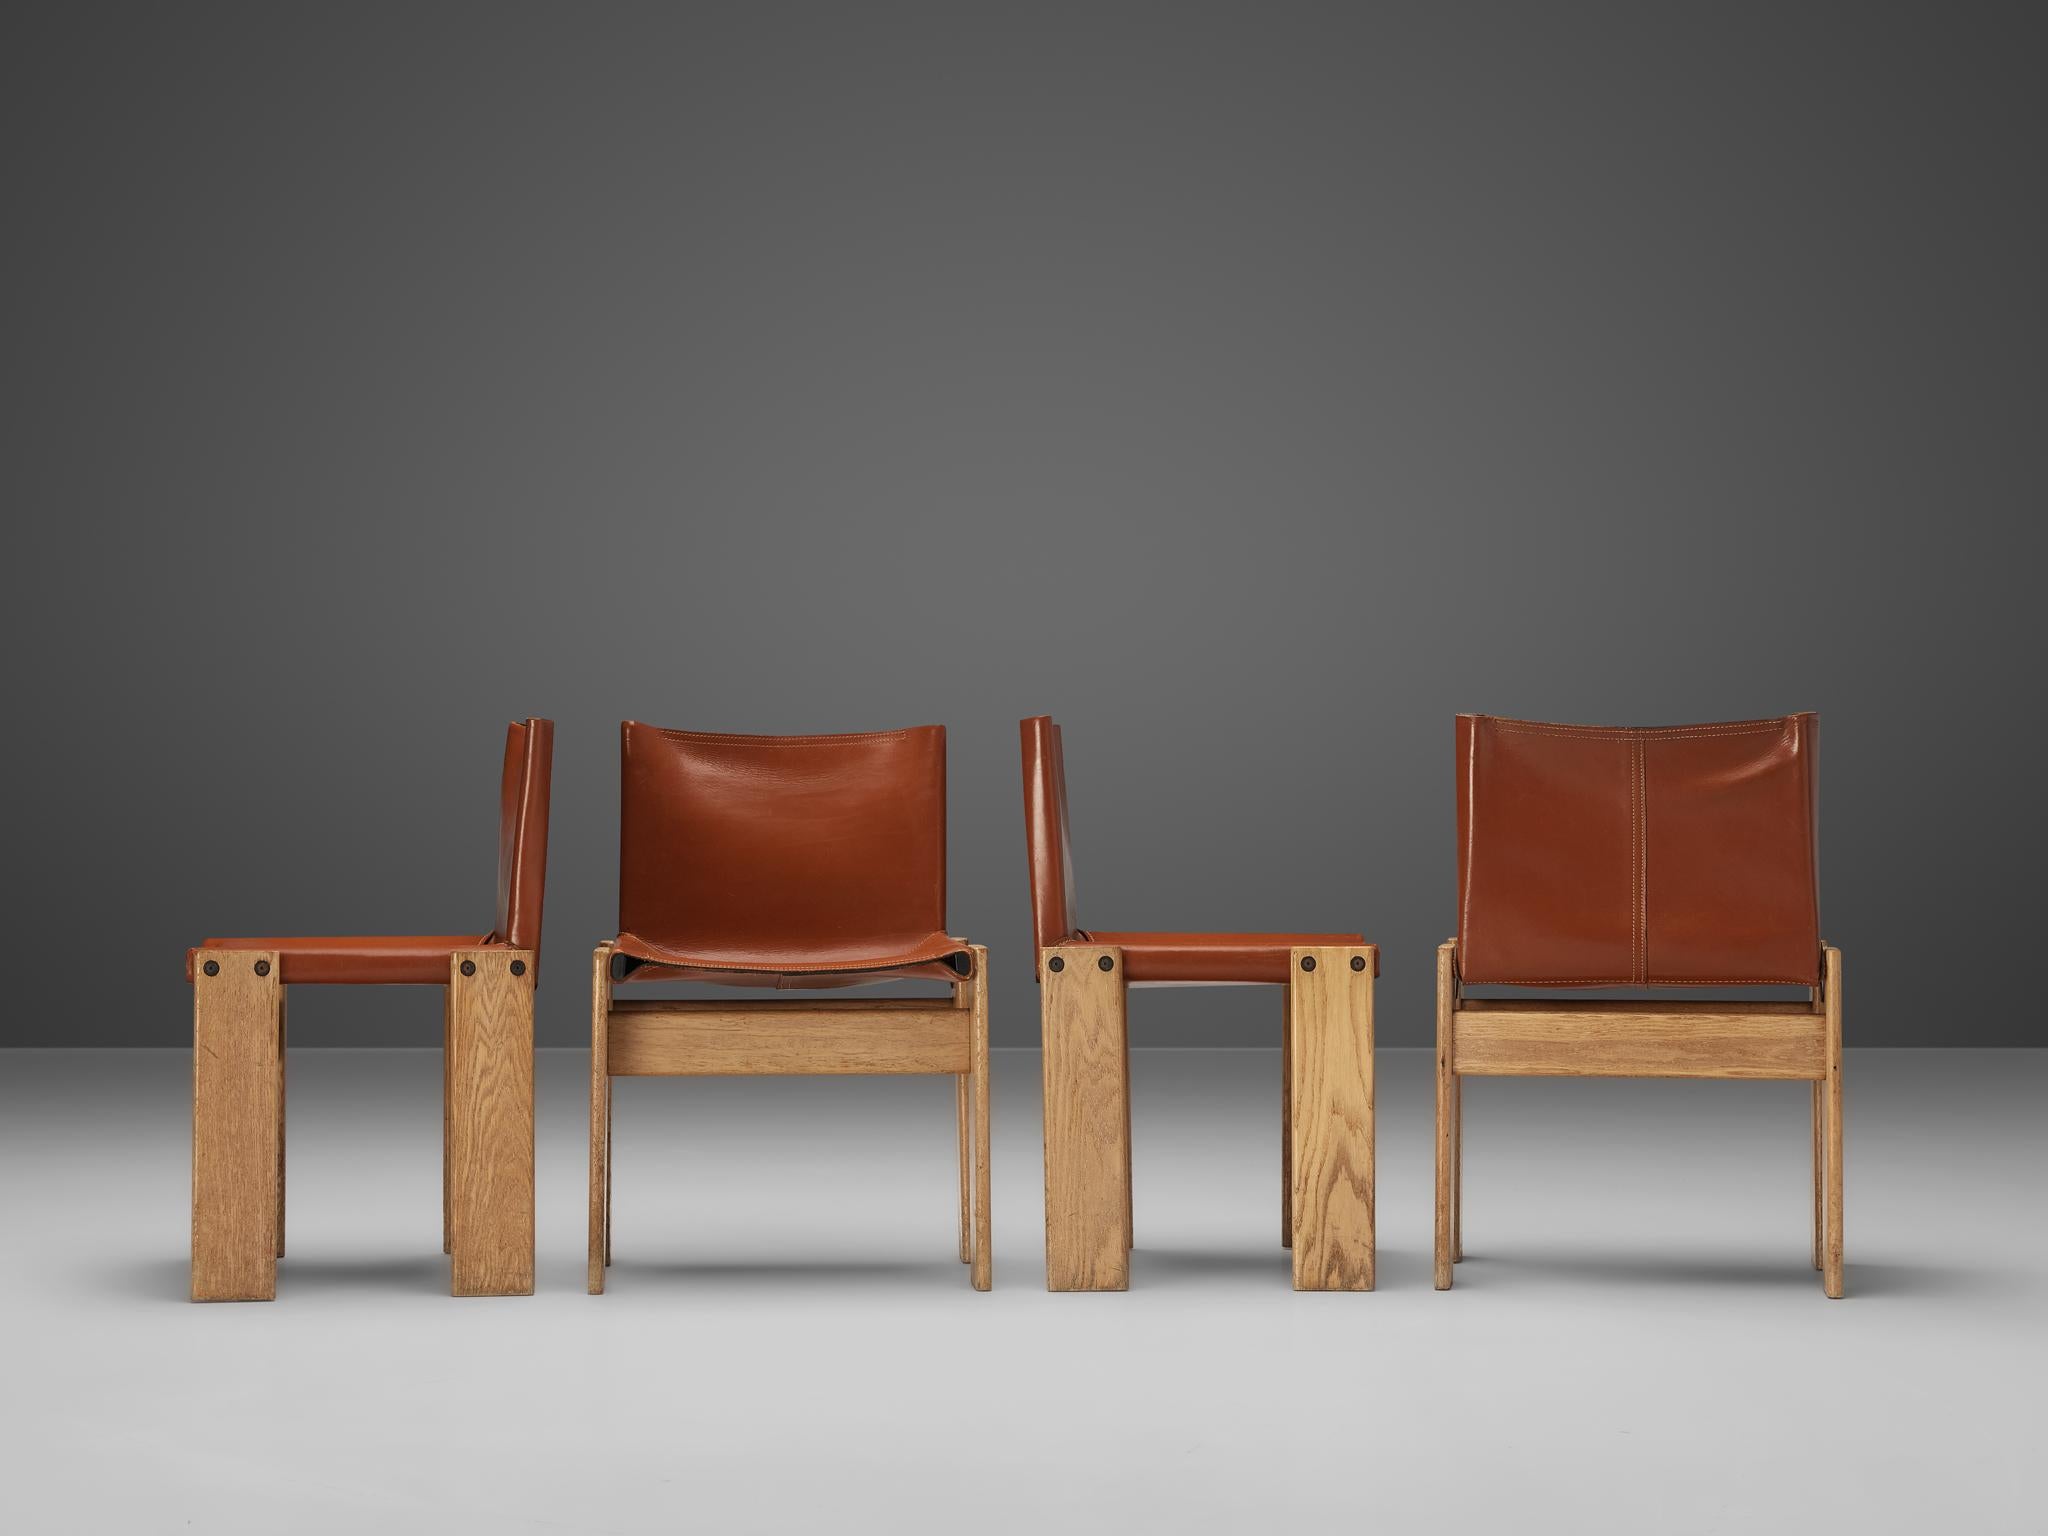 Patinated Afra & Tobia Scarpa Set of Four 'Monk' Dining Chairs in Red Leather and Ash  For Sale